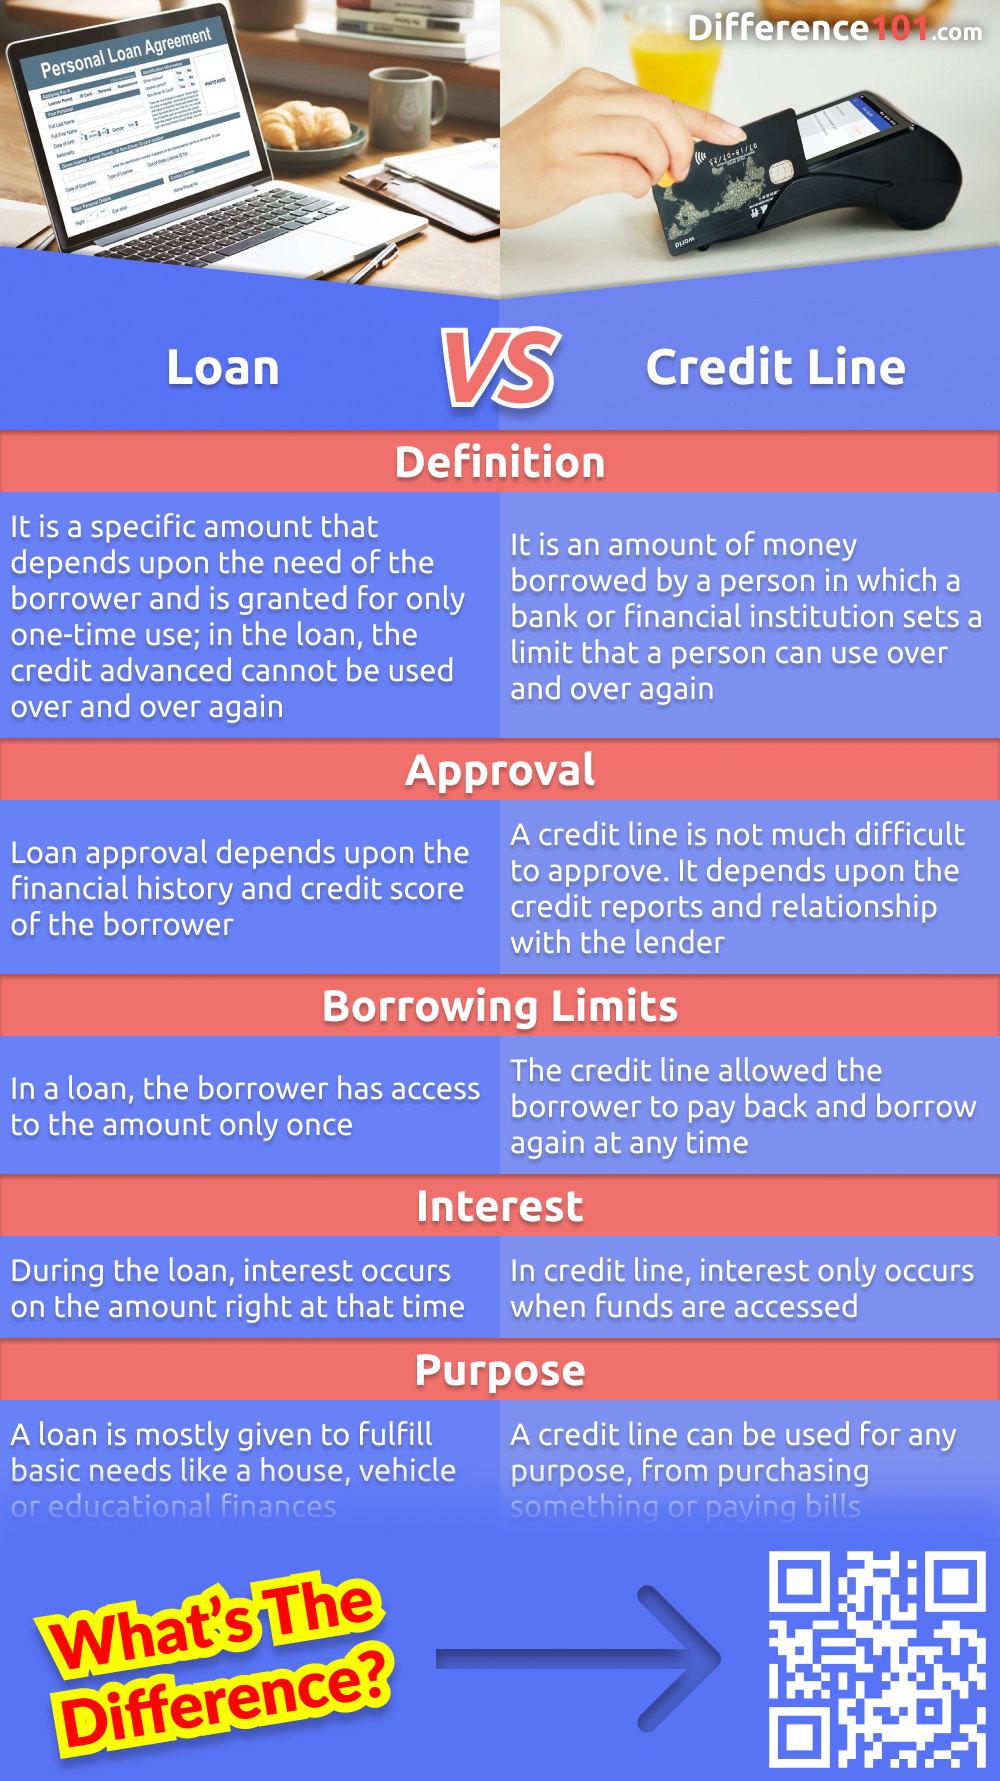 A loan and a credit line are two different ways of borrowing money. But what are the differences between the two? And what are the pros and cons of each? Read more to find out which one is right for you.